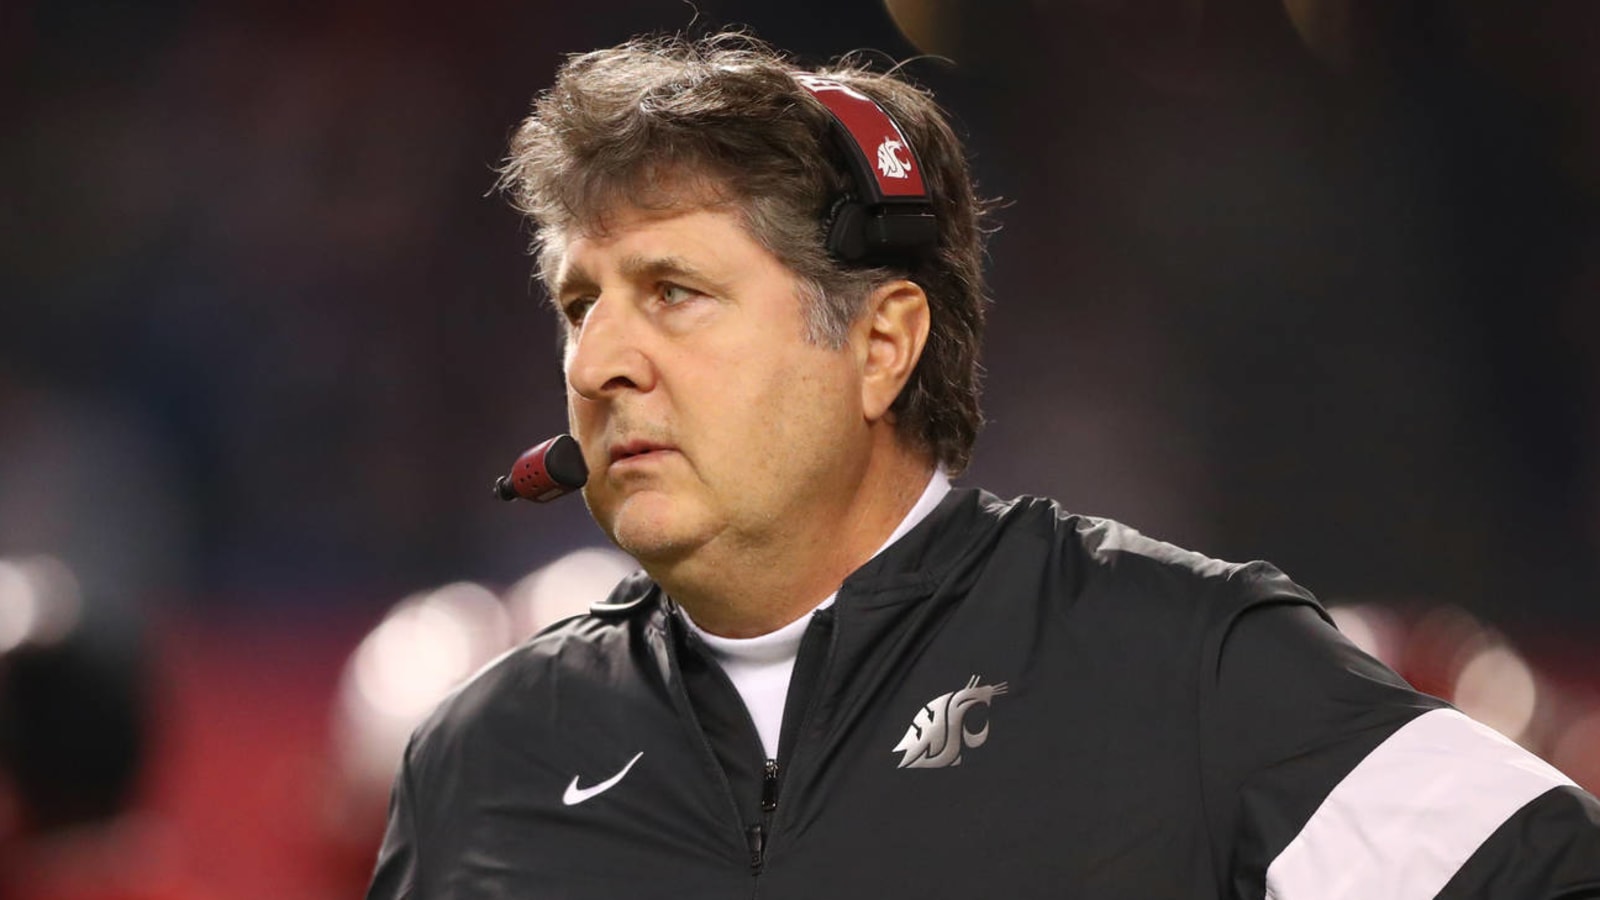 Mike Leach shares funny ‘Tiger King’ meme